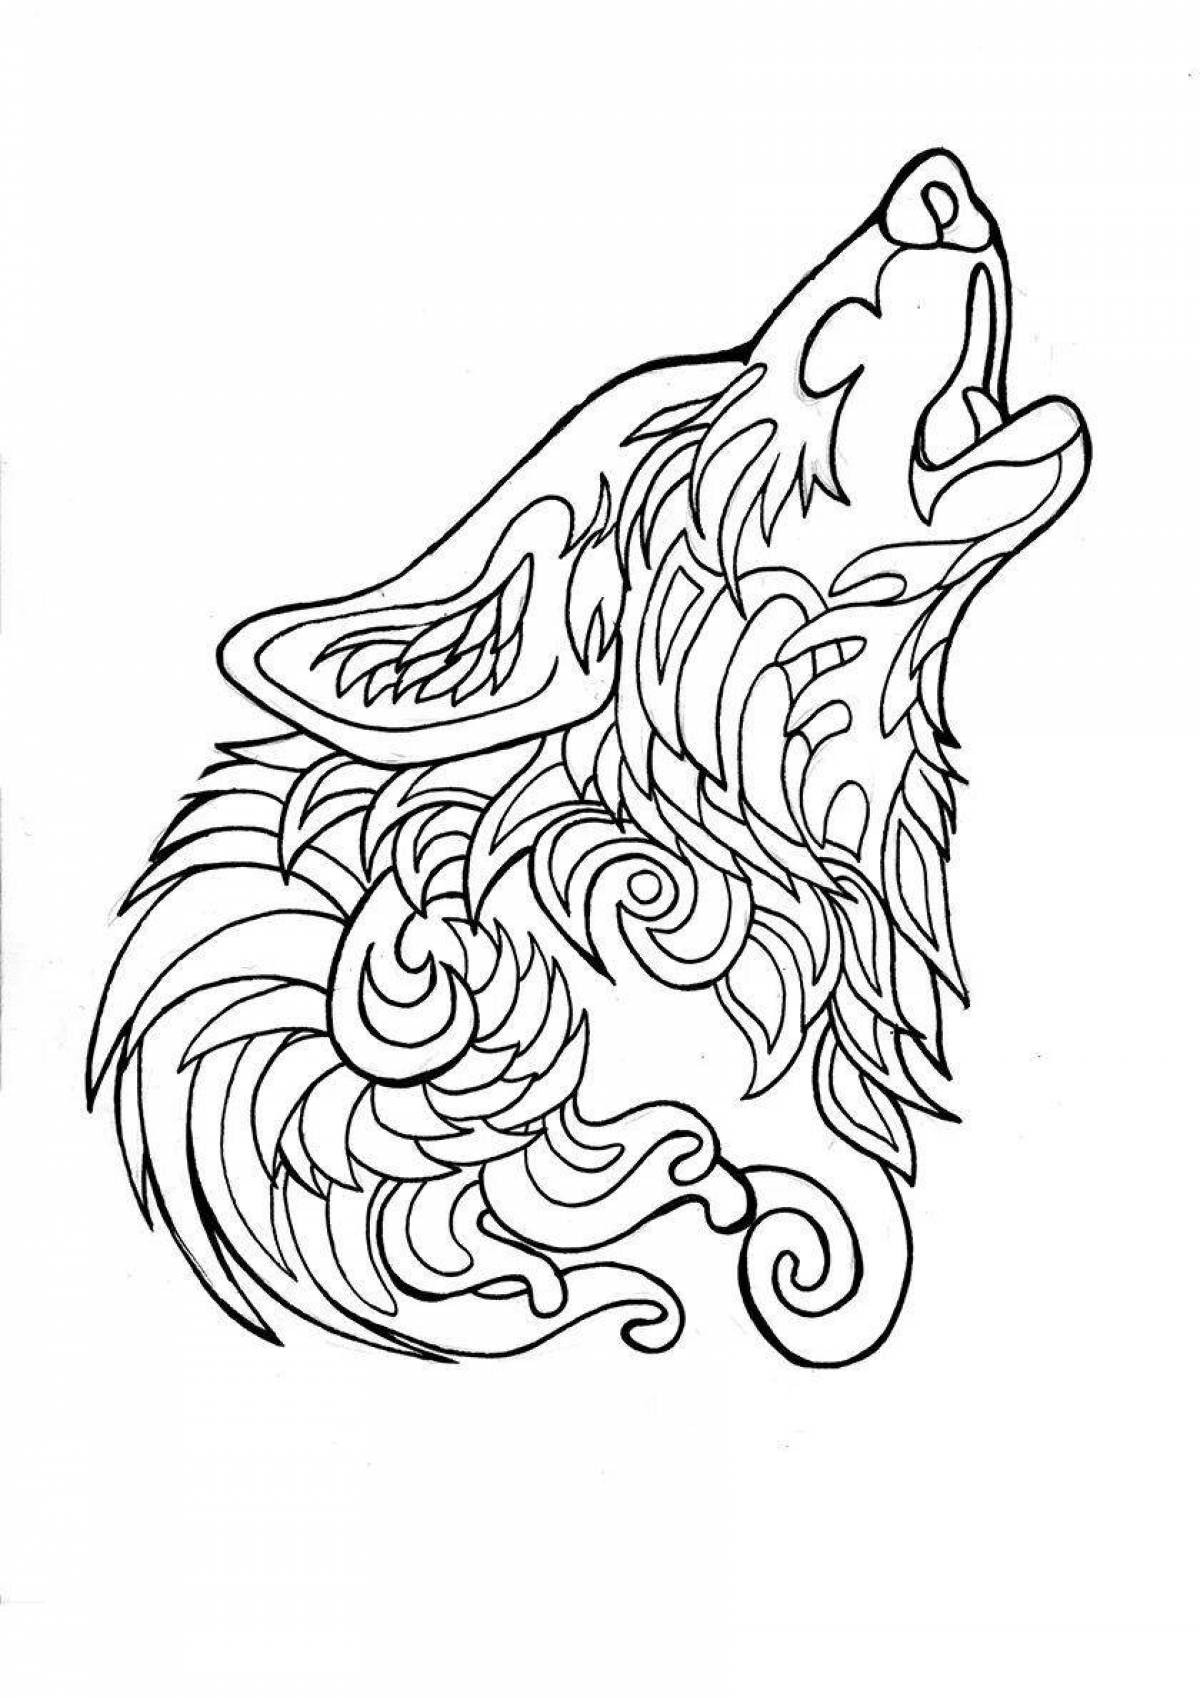 Fearless wolf coloring page